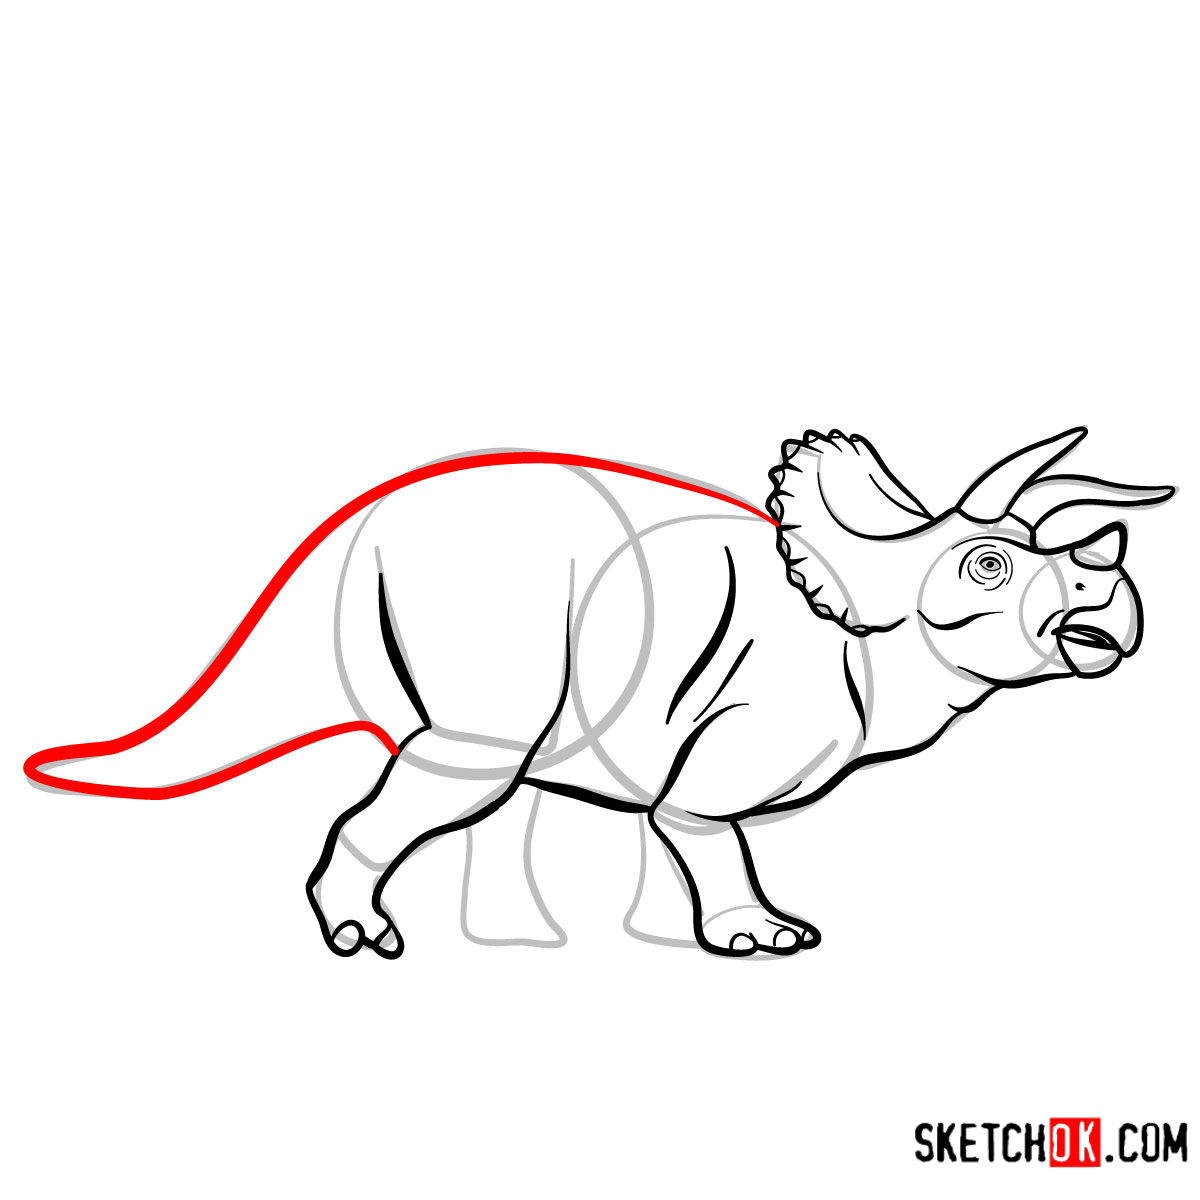 How to draw a Triceratops | Extinct Animals - step 09